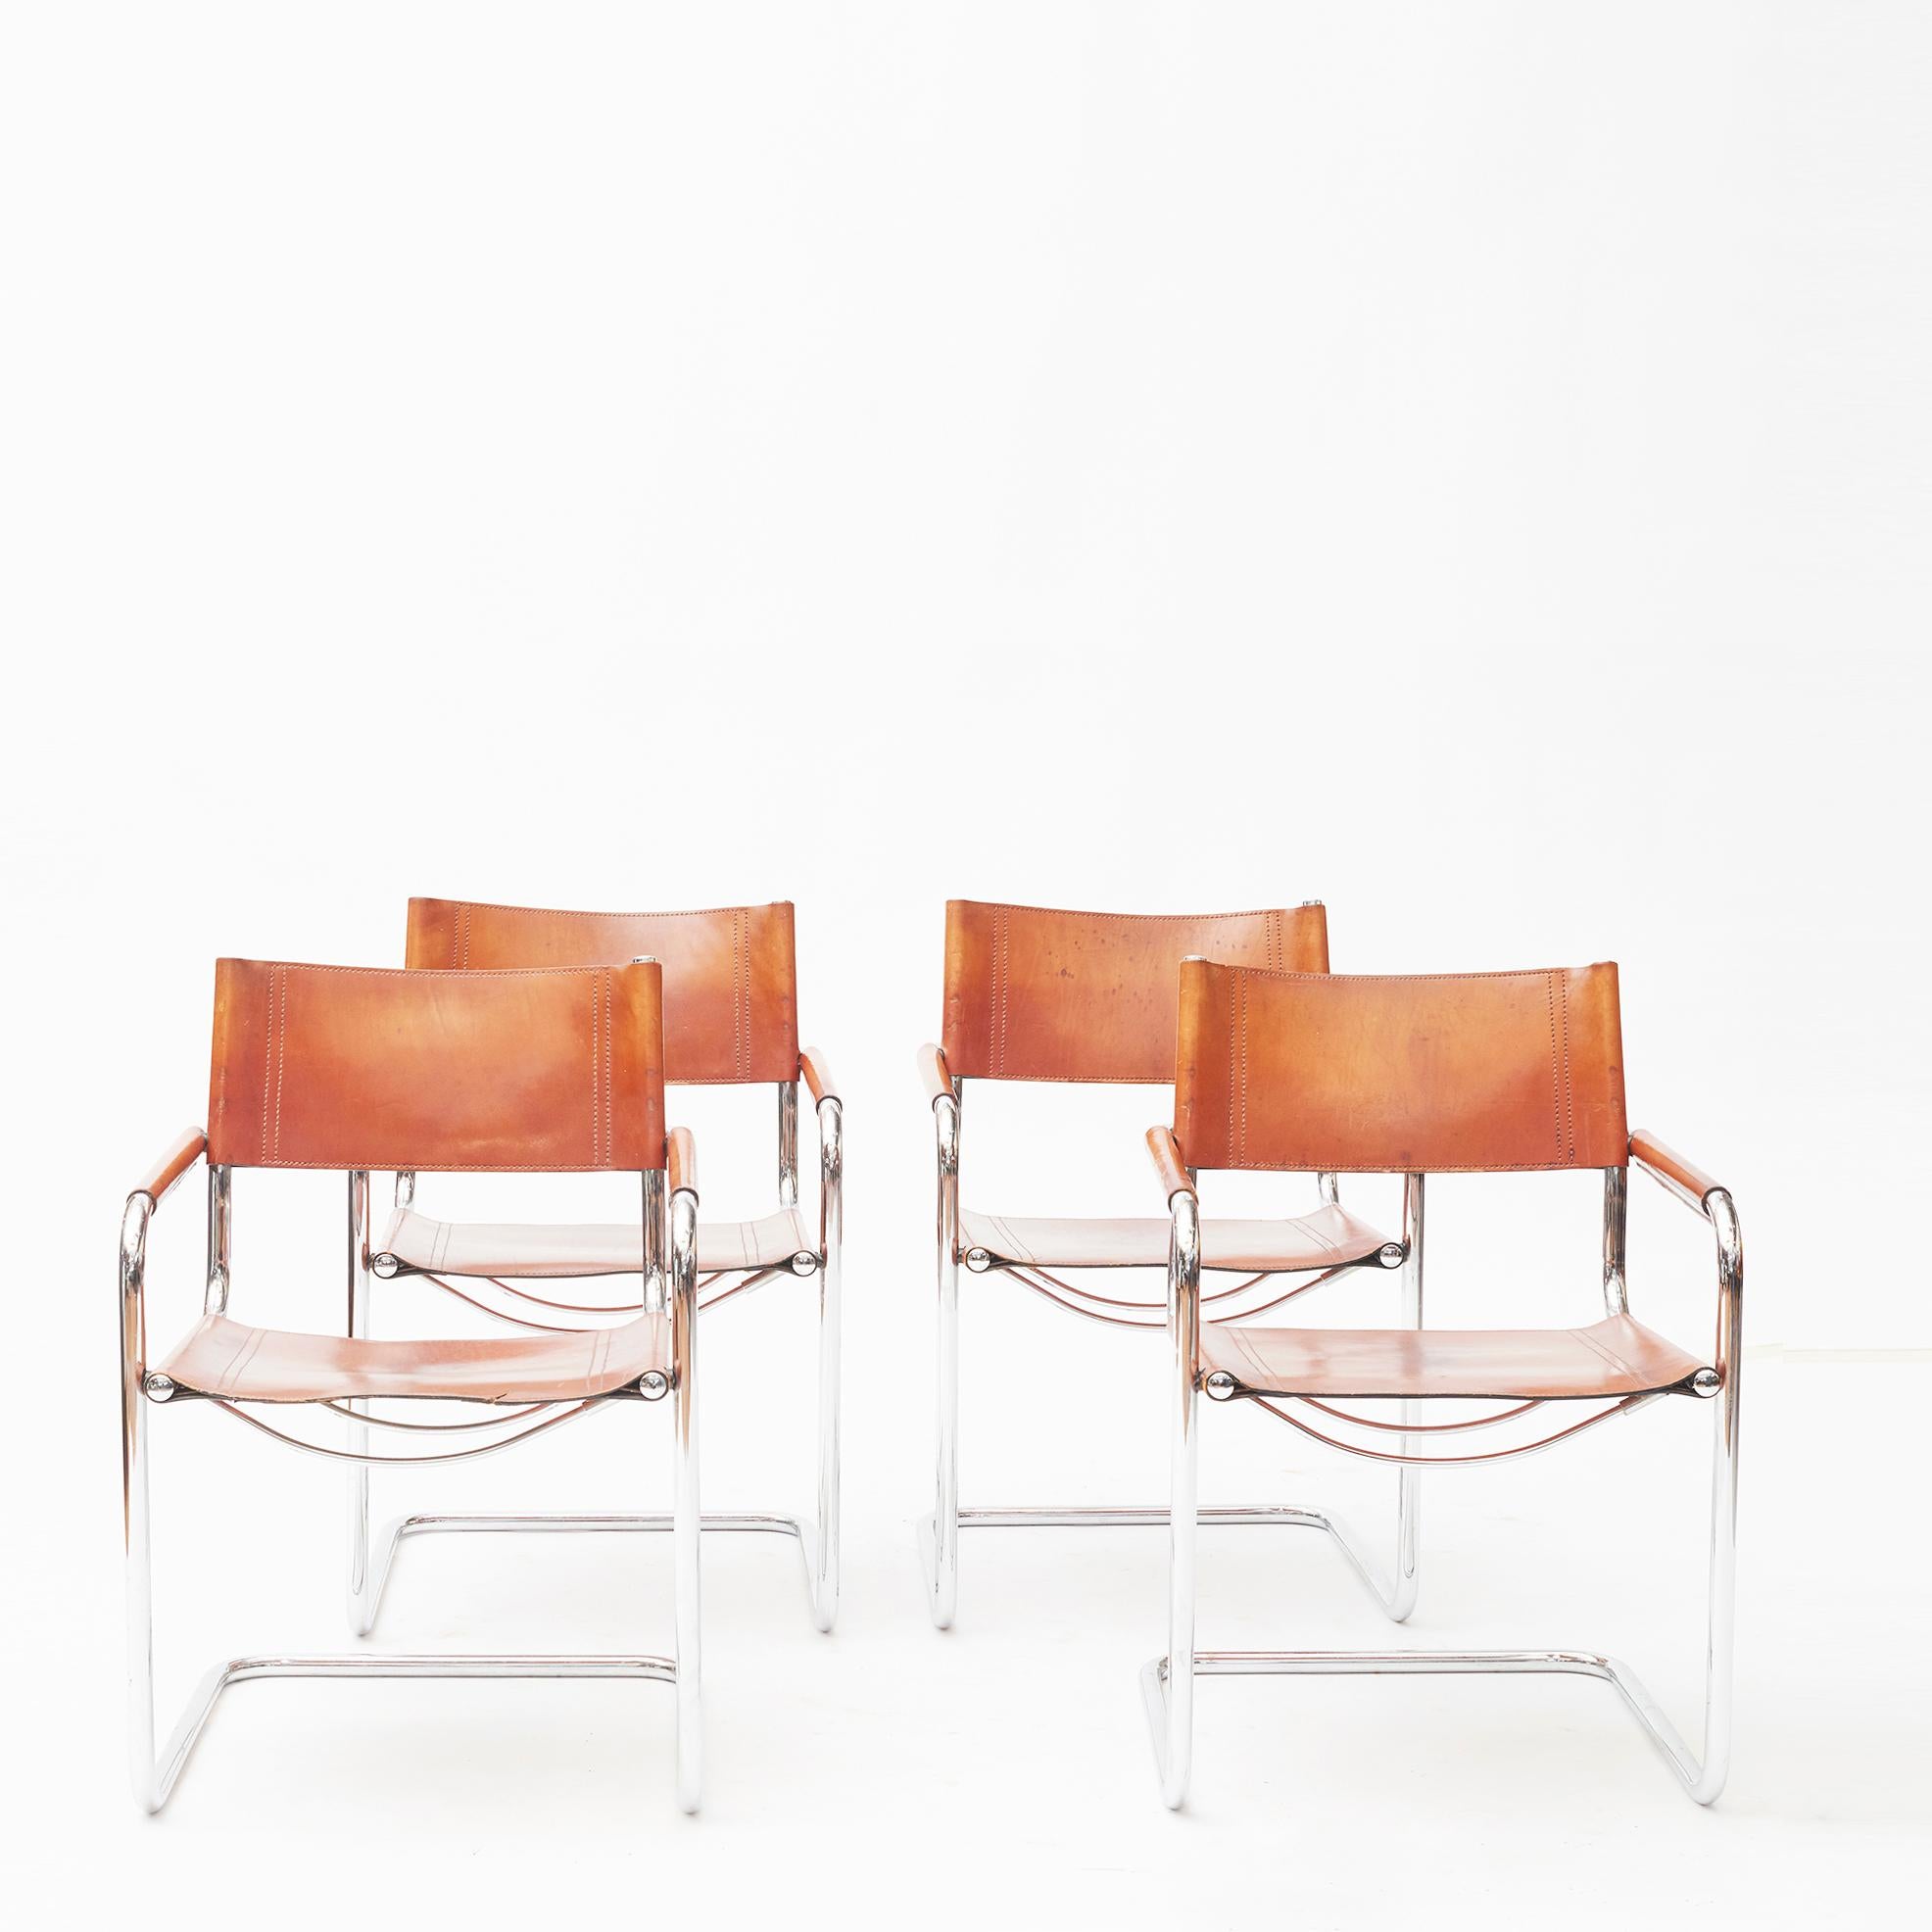 Set of four MG5 dining or office chairs designed by Mart Stam.
Tubular chrome frames with brown leather seating, backrest and armrest. Beautiful patina.
Italy, circa 1960-1970.

Can be sold in pairs.

Please note: One of the seats has been